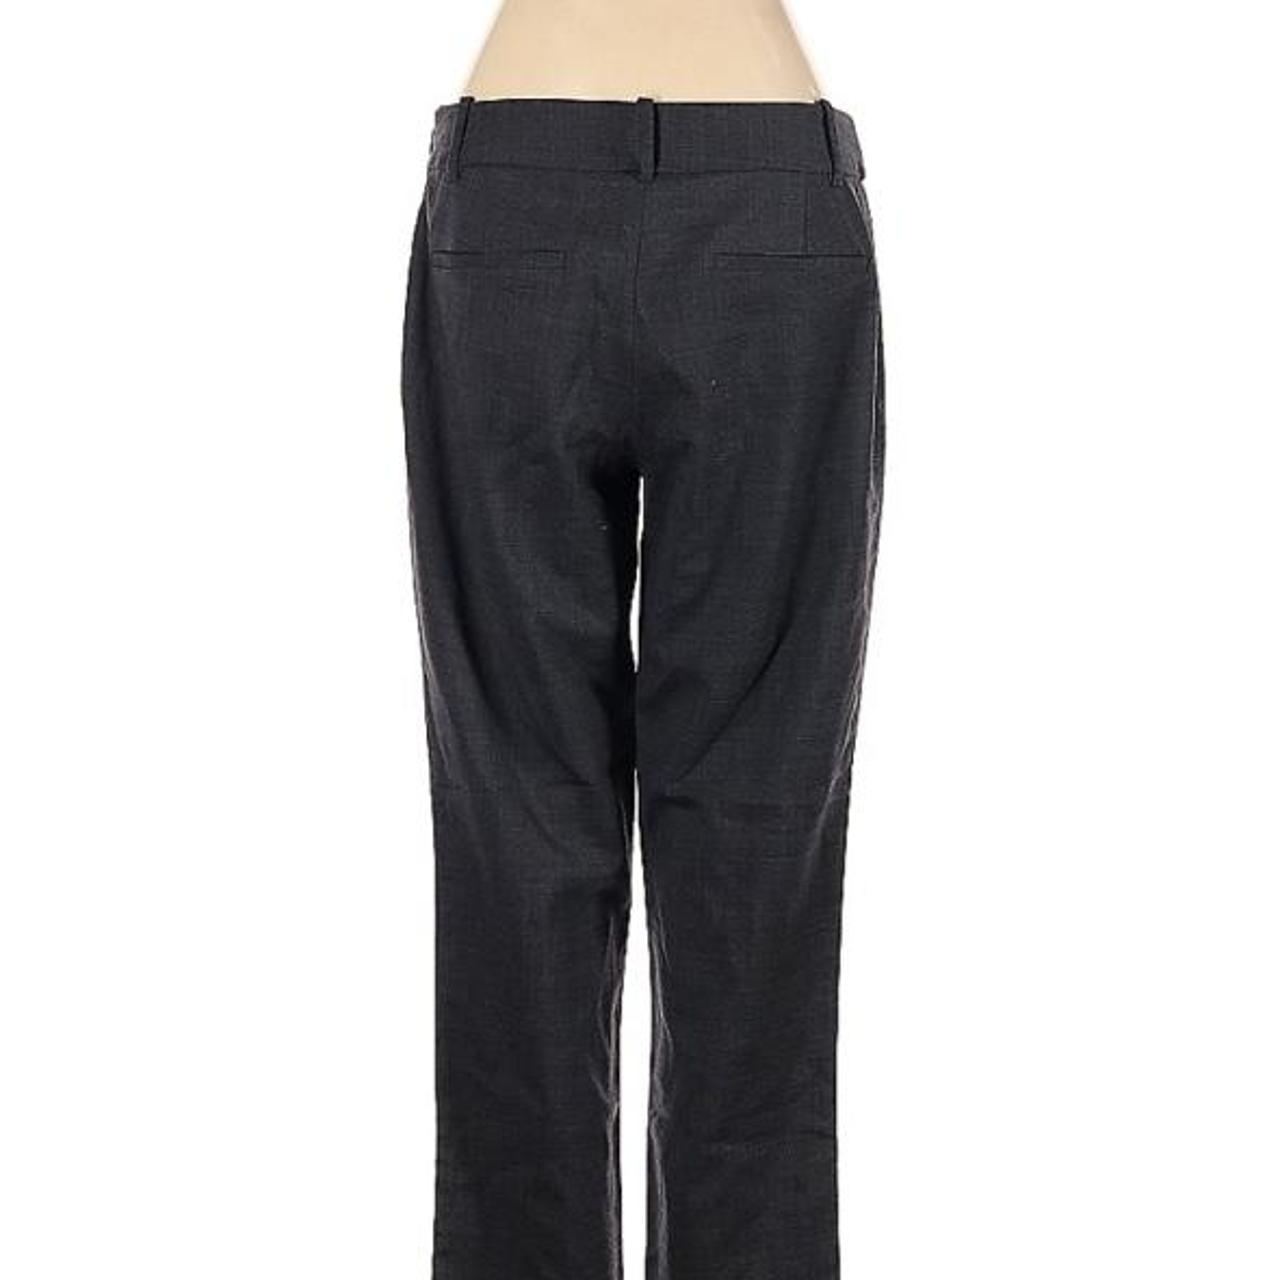 Barney's Women's Grey and Black Trousers (4)